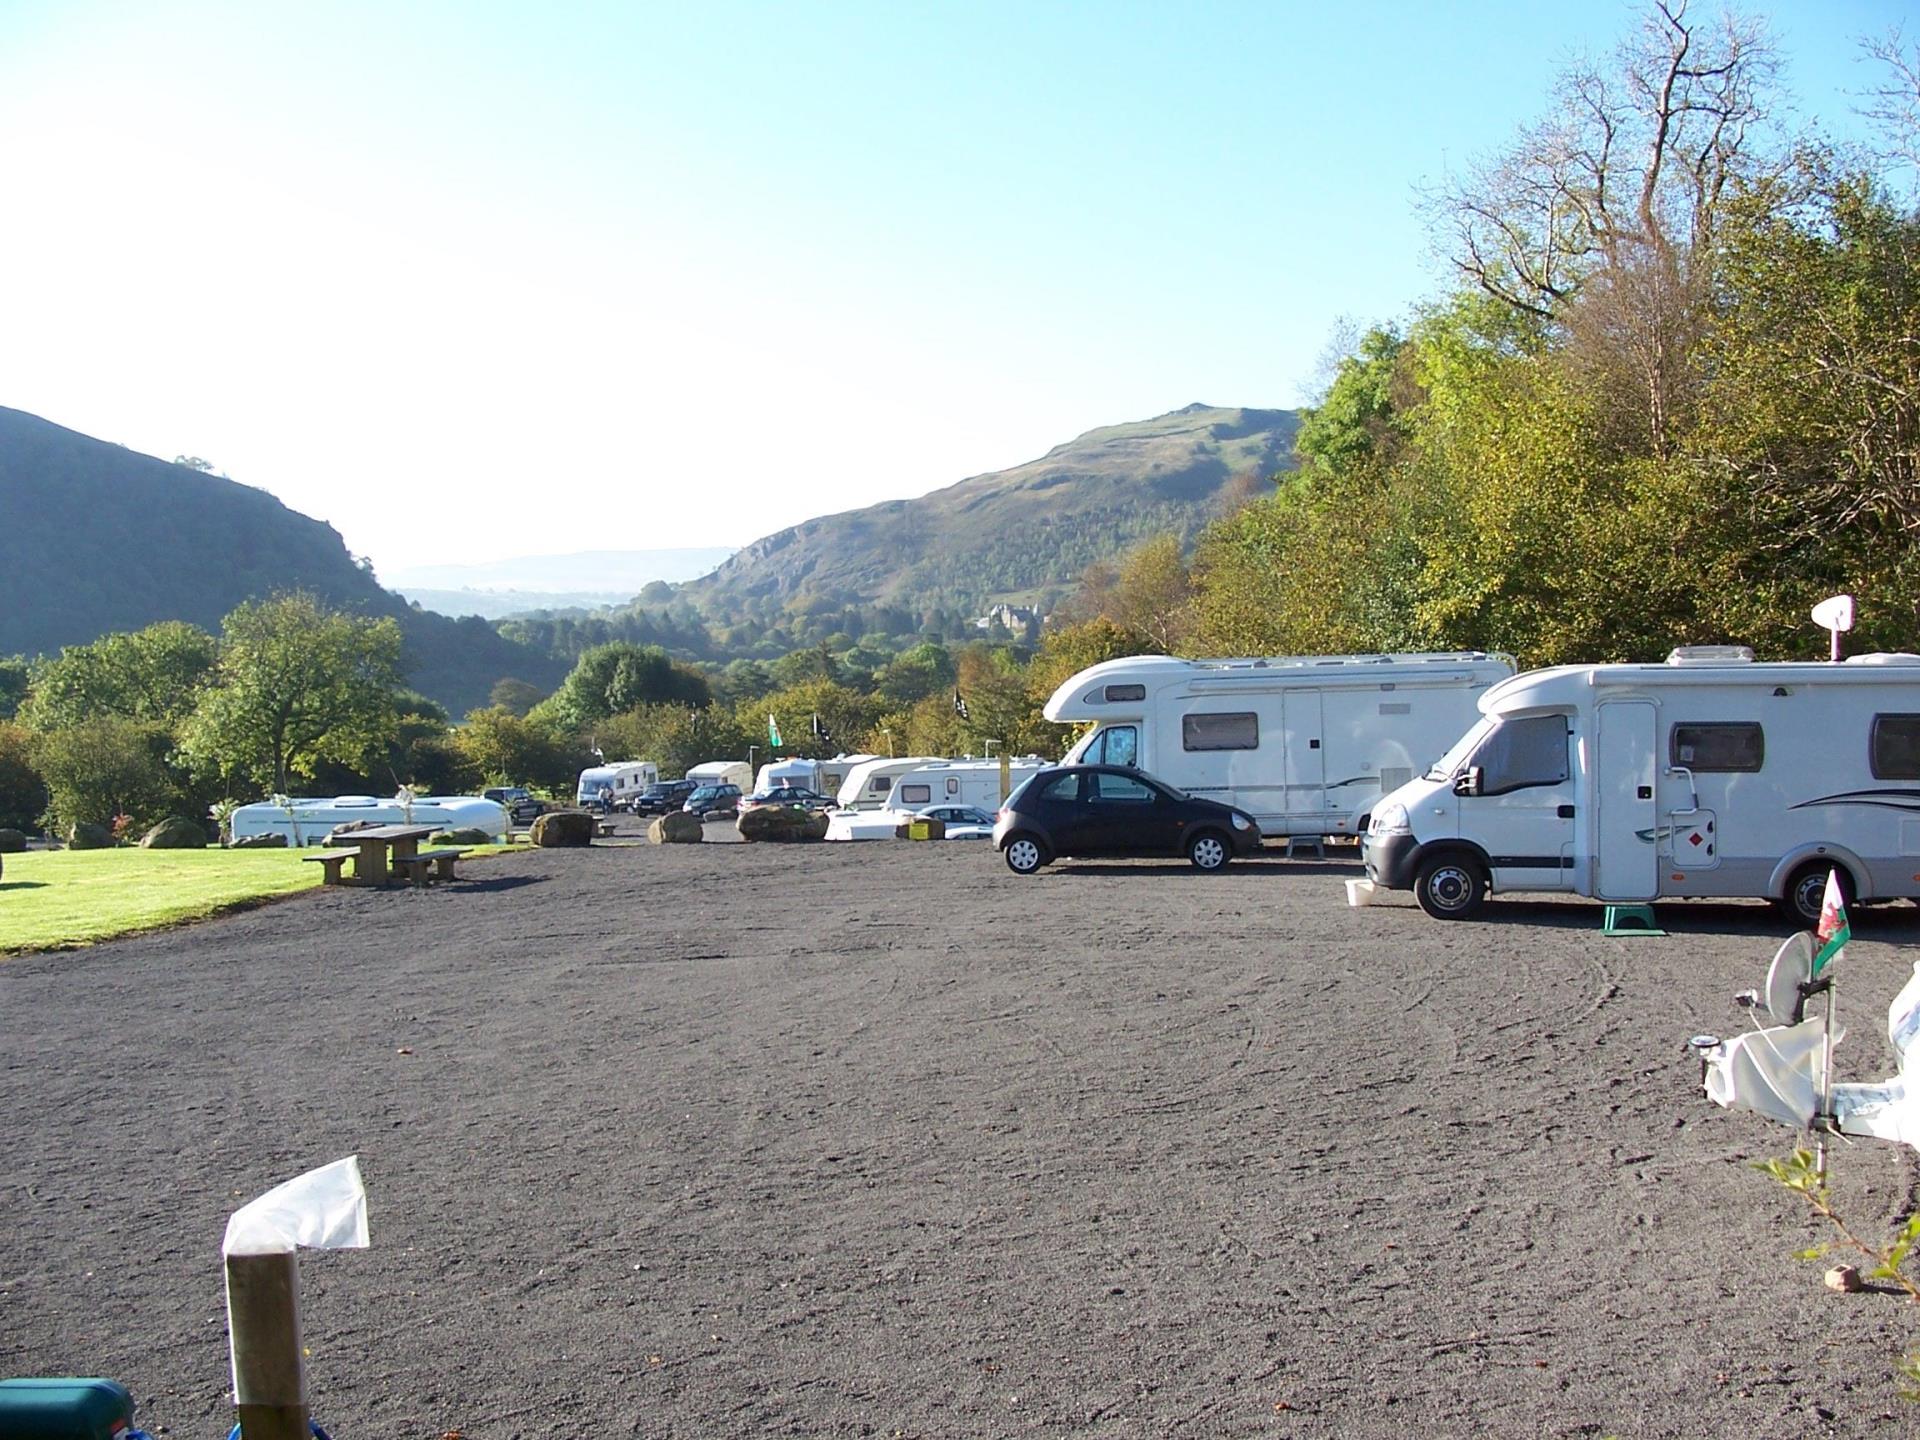 Some Caravan pitches